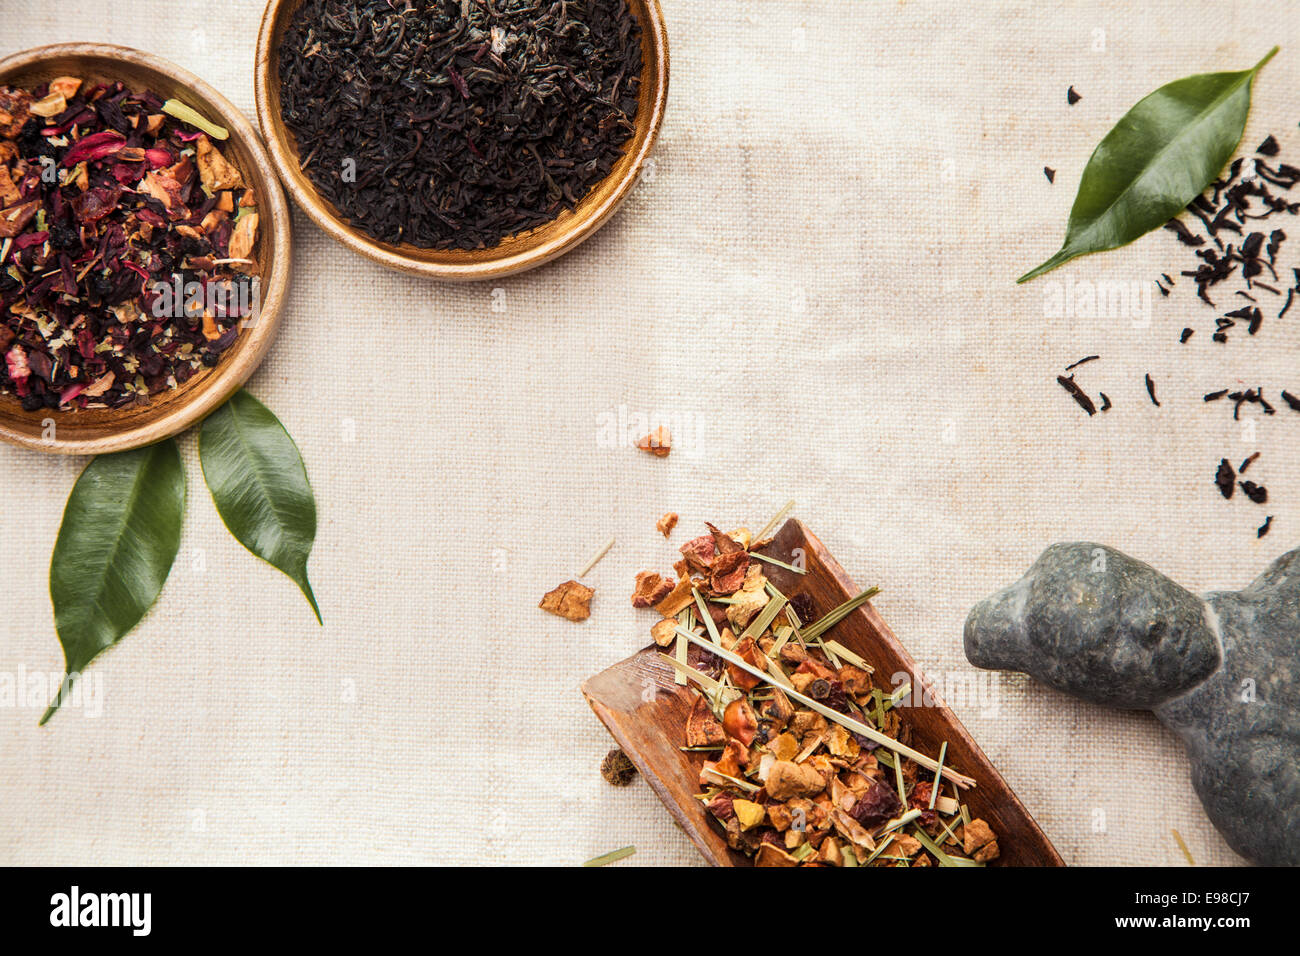 Close-up of medicinal and aromatic plants, leaves and an Asian ancient statue, symbol of traditional Chinese medicine Stock Photo